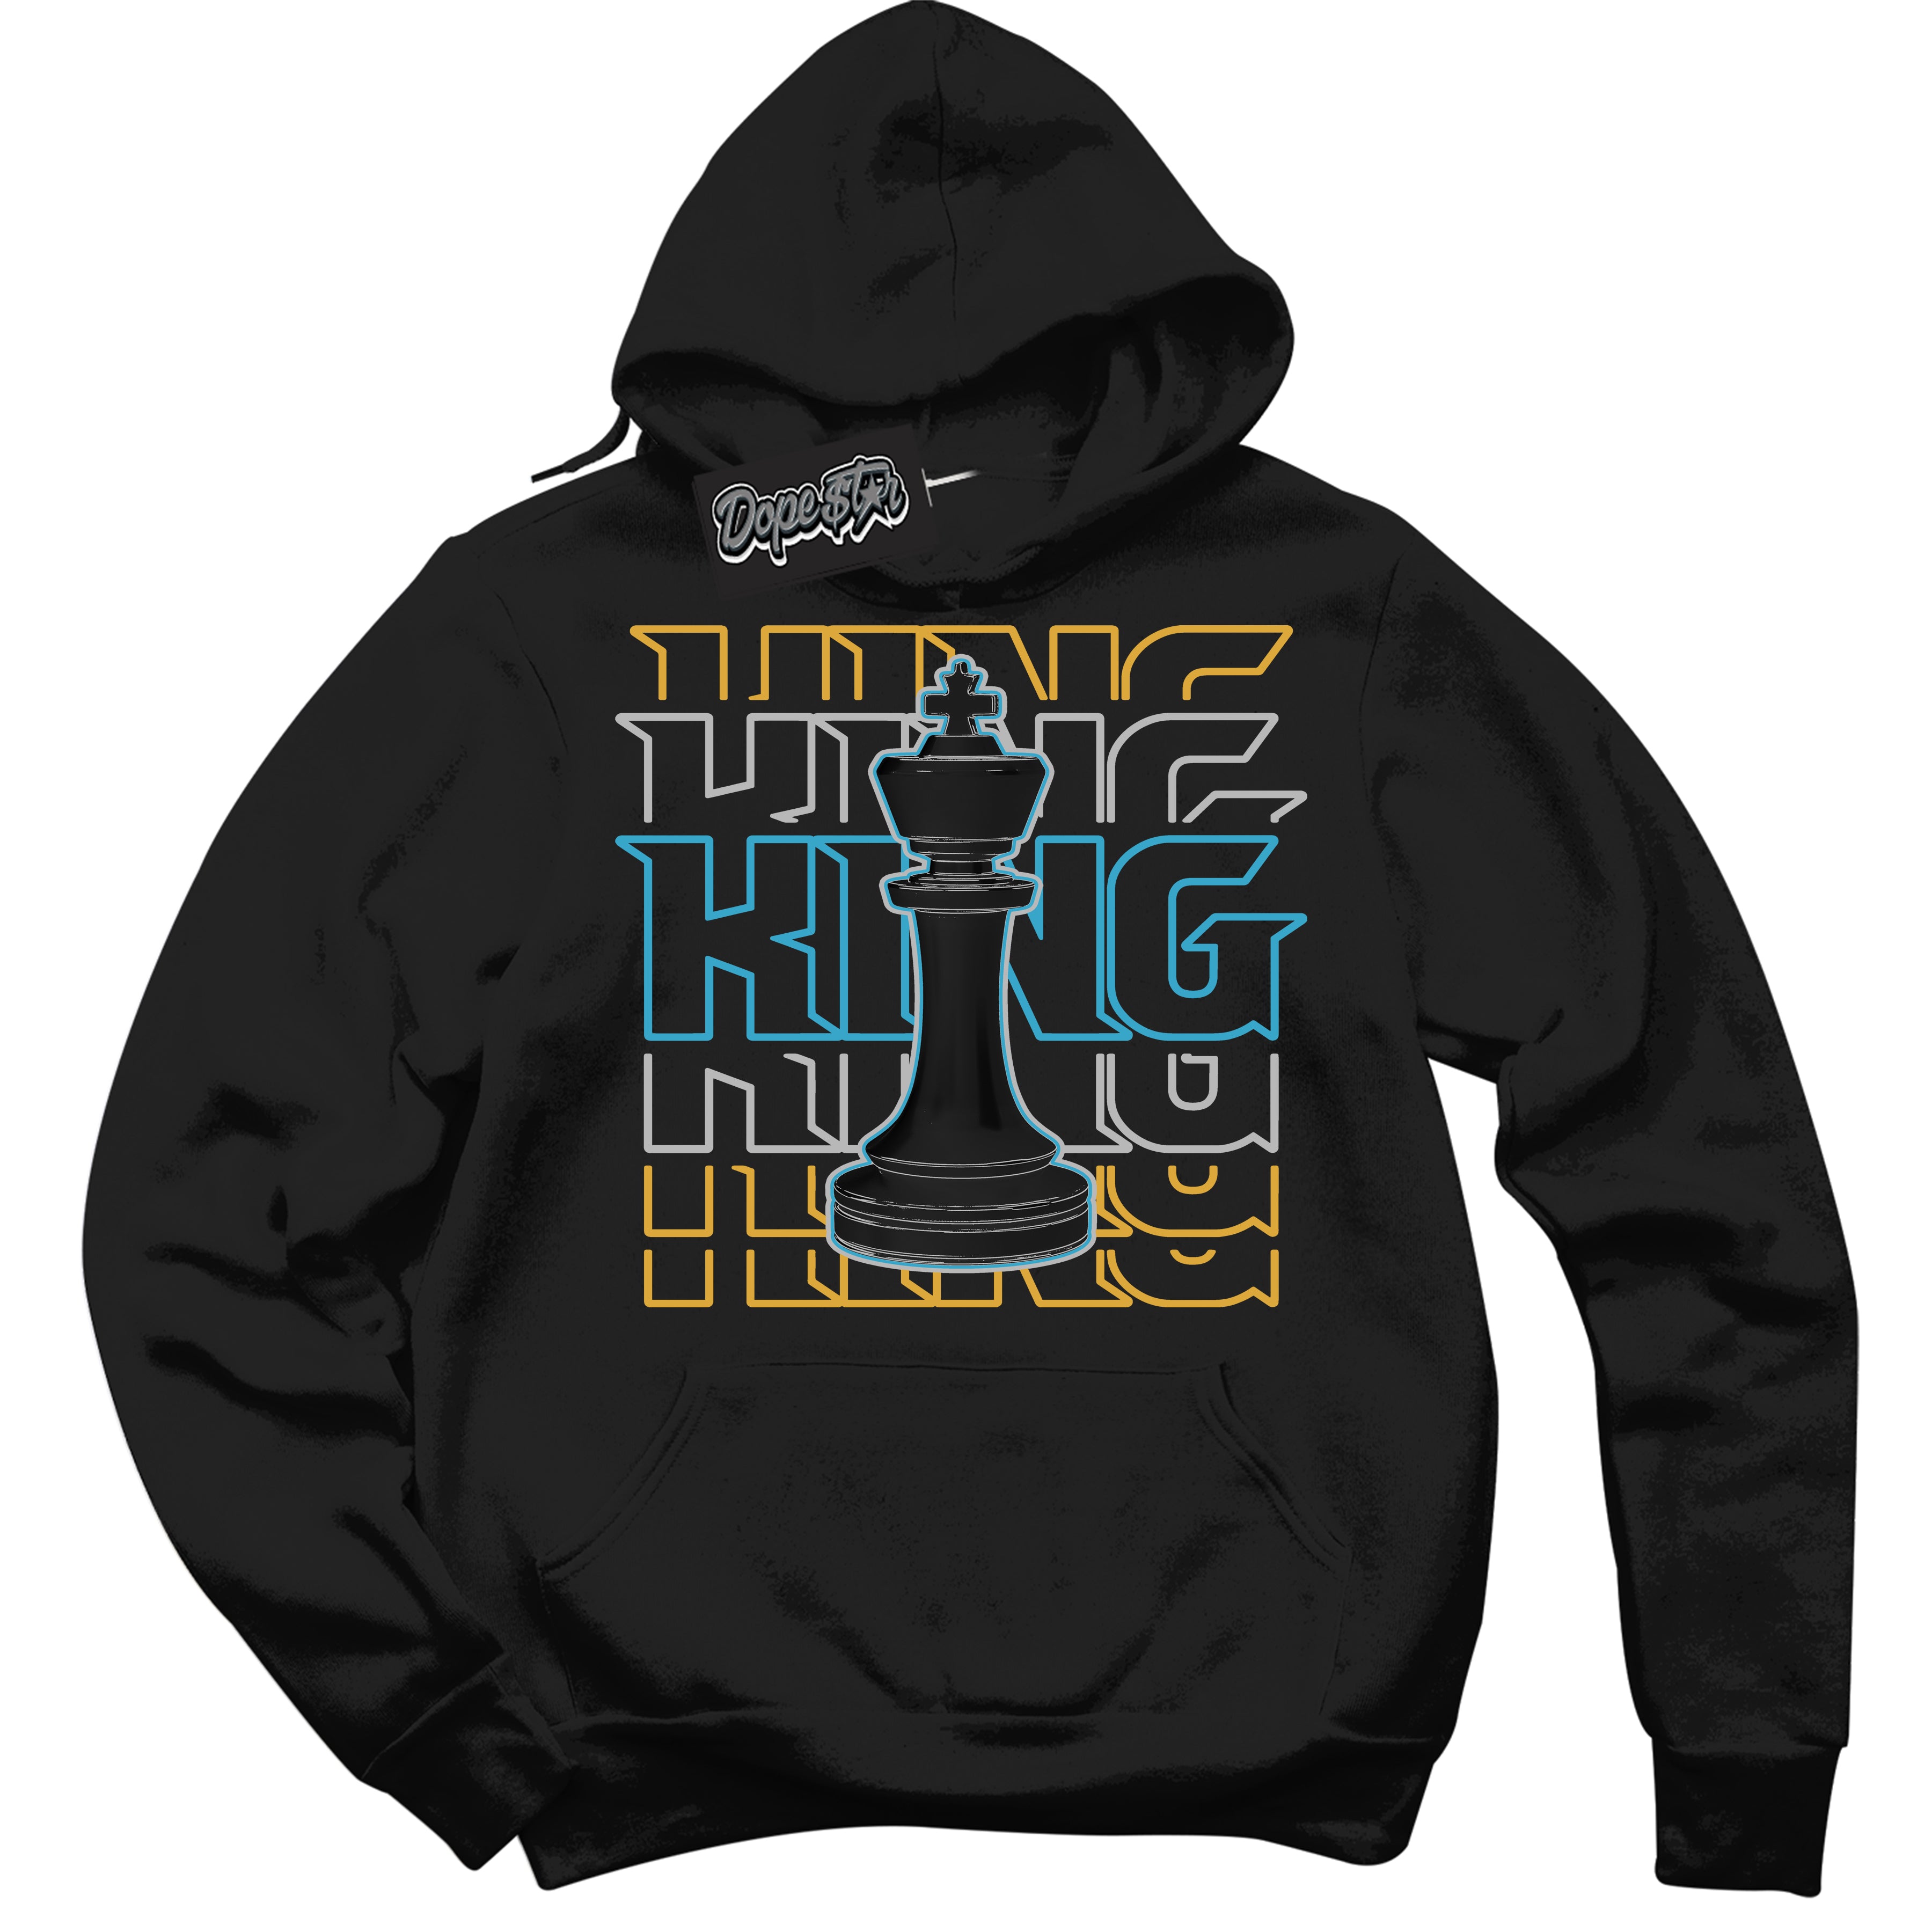 Cool Black Hoodie with “ King Chess ”  design that Perfectly Matches Aqua 5s Sneakers.